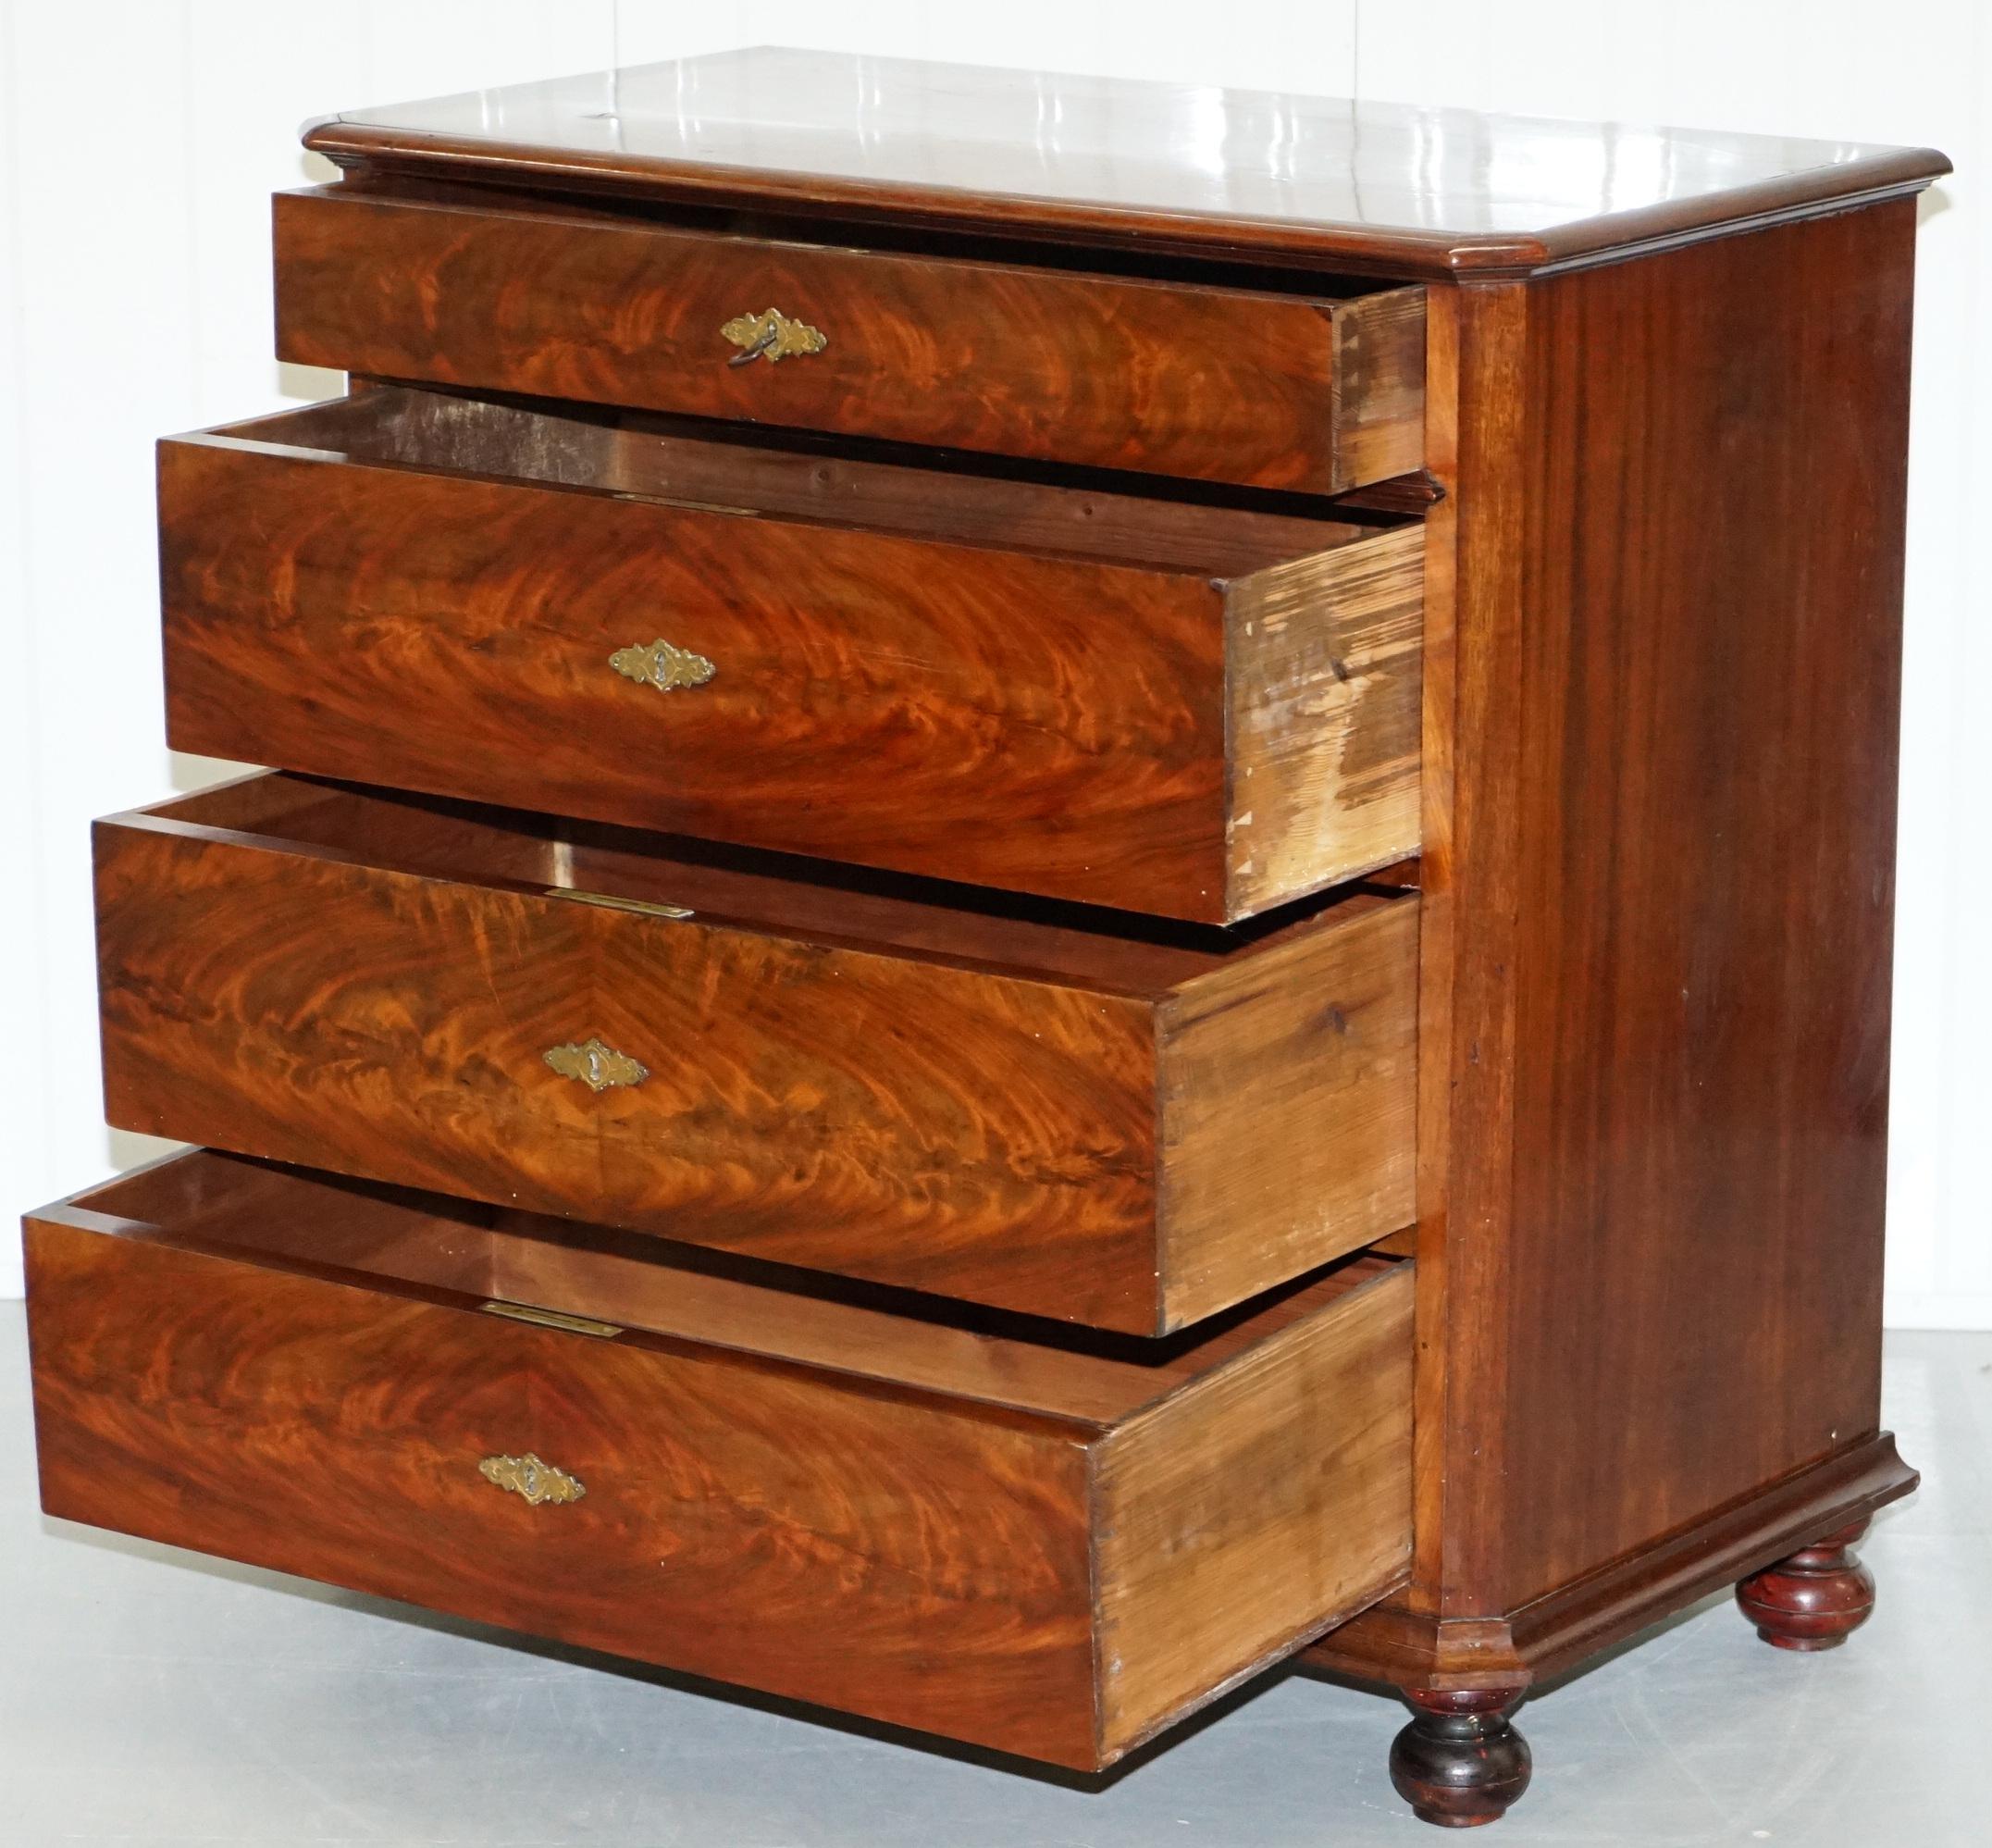 Stunning Biedermeier Flamed Mahogany Small Chest of Drawers Rare Find circa 1820 11